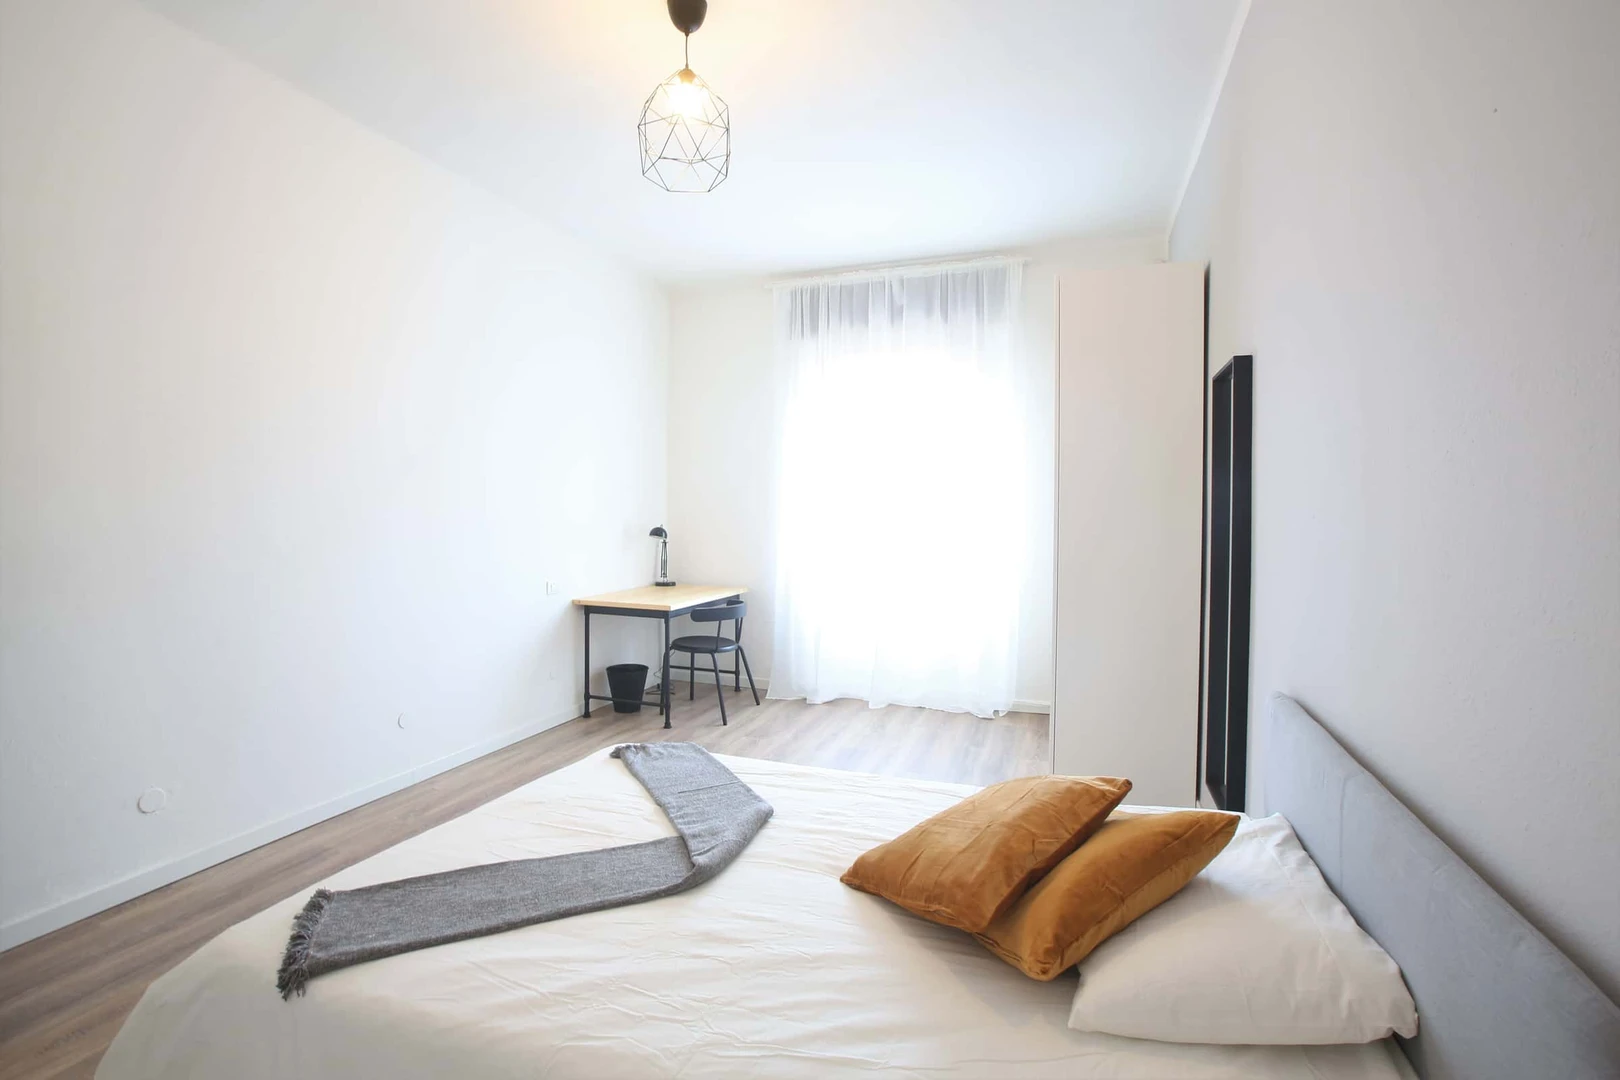 Room for rent in a shared flat in modena